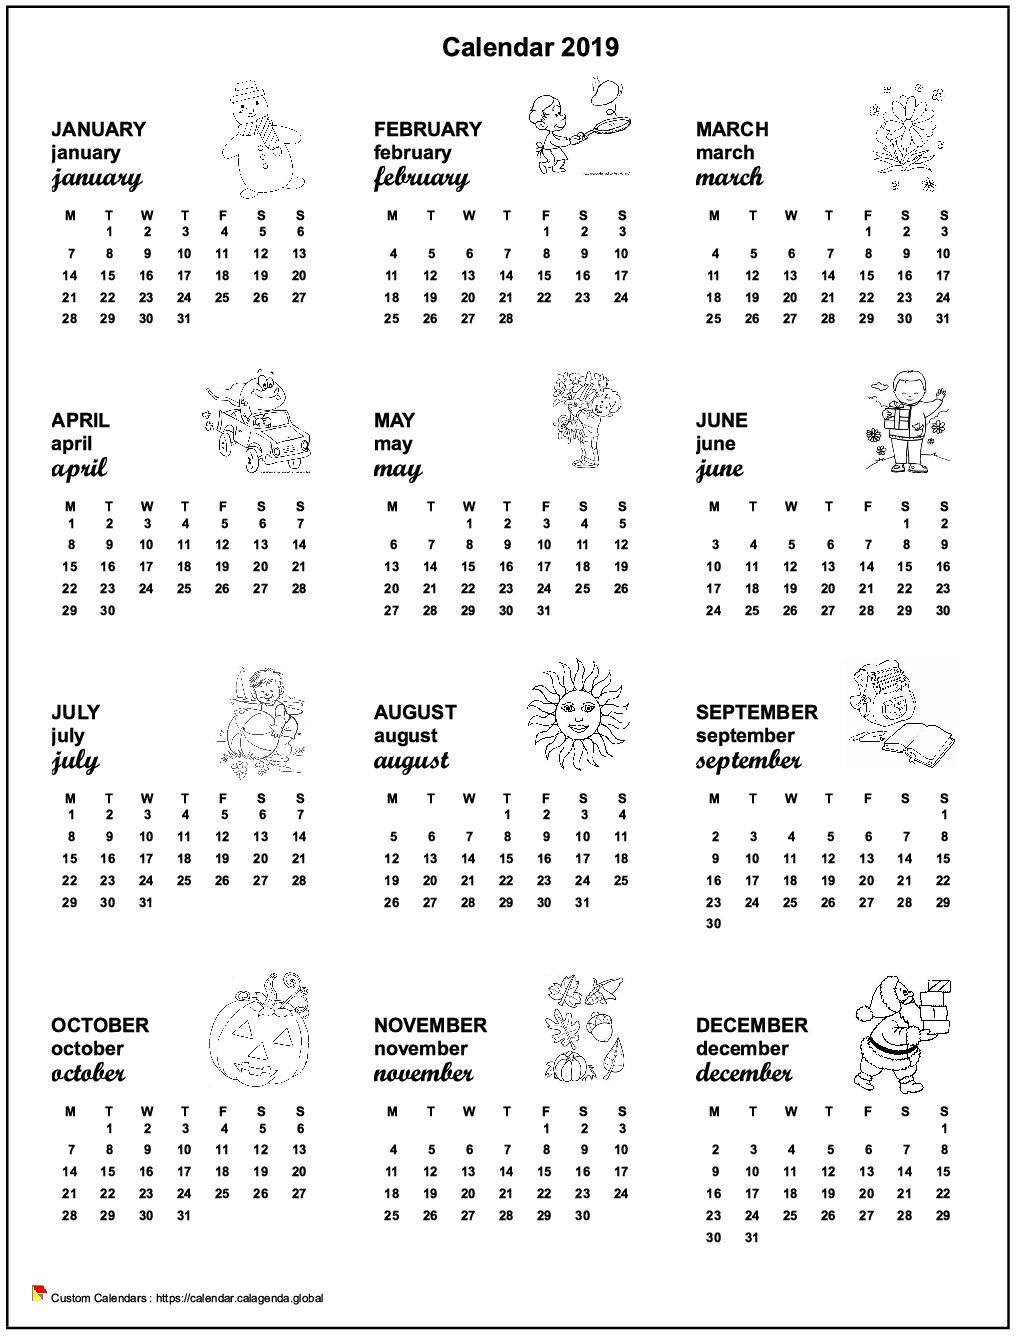 Calendar 2039 annual maternal and primary school